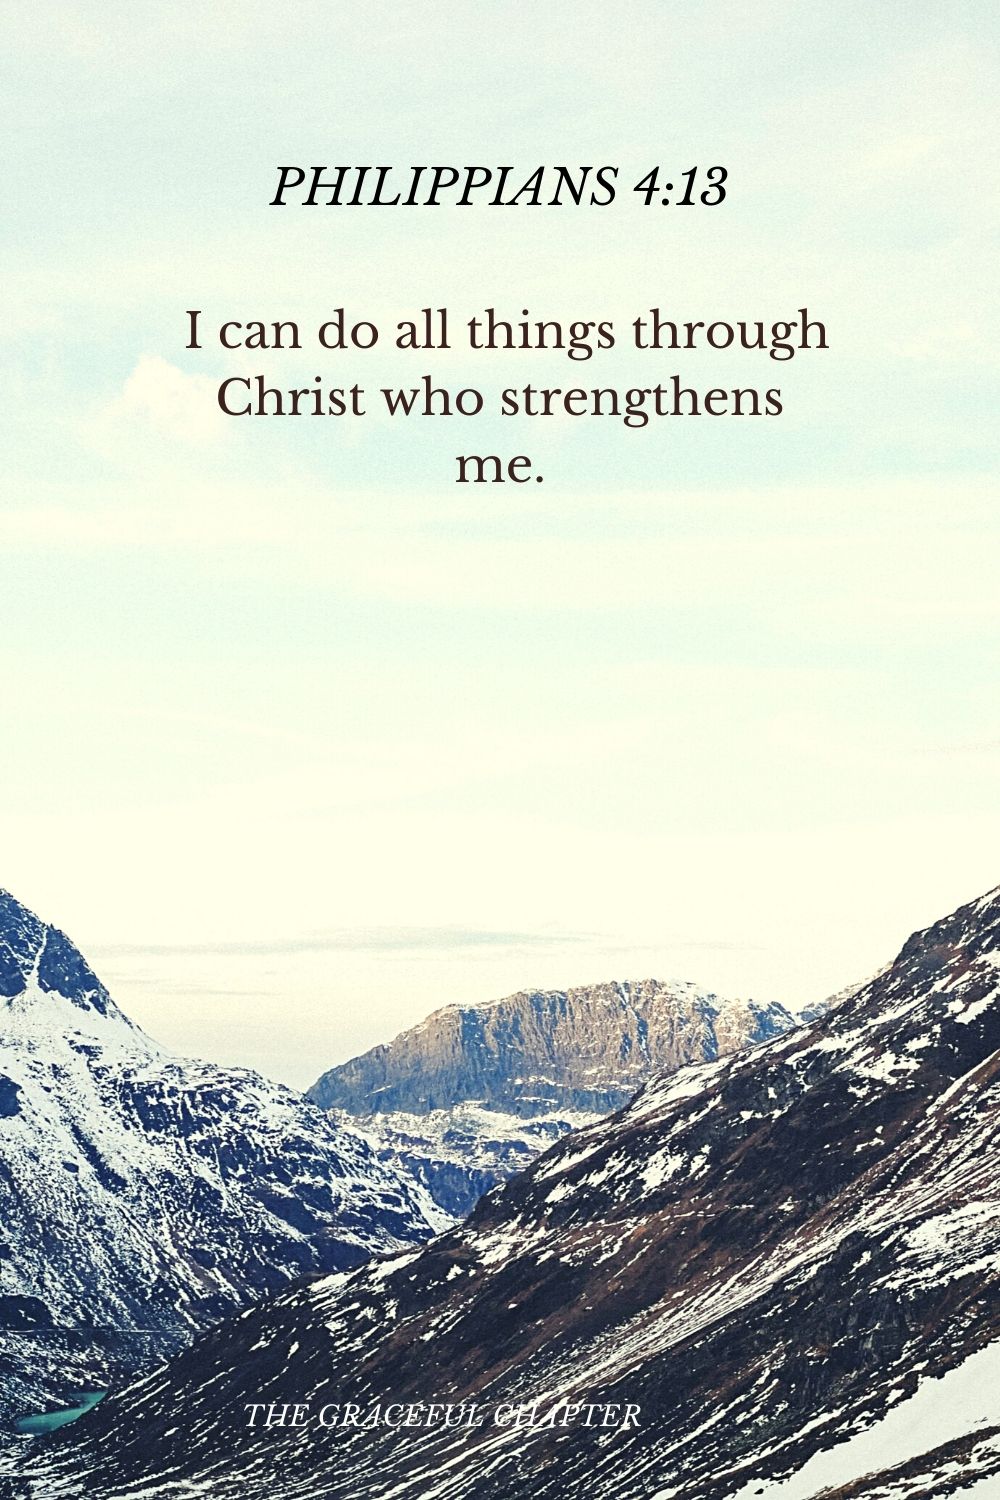  I can do all things through Christ who strengthens me. Philippians 4:13